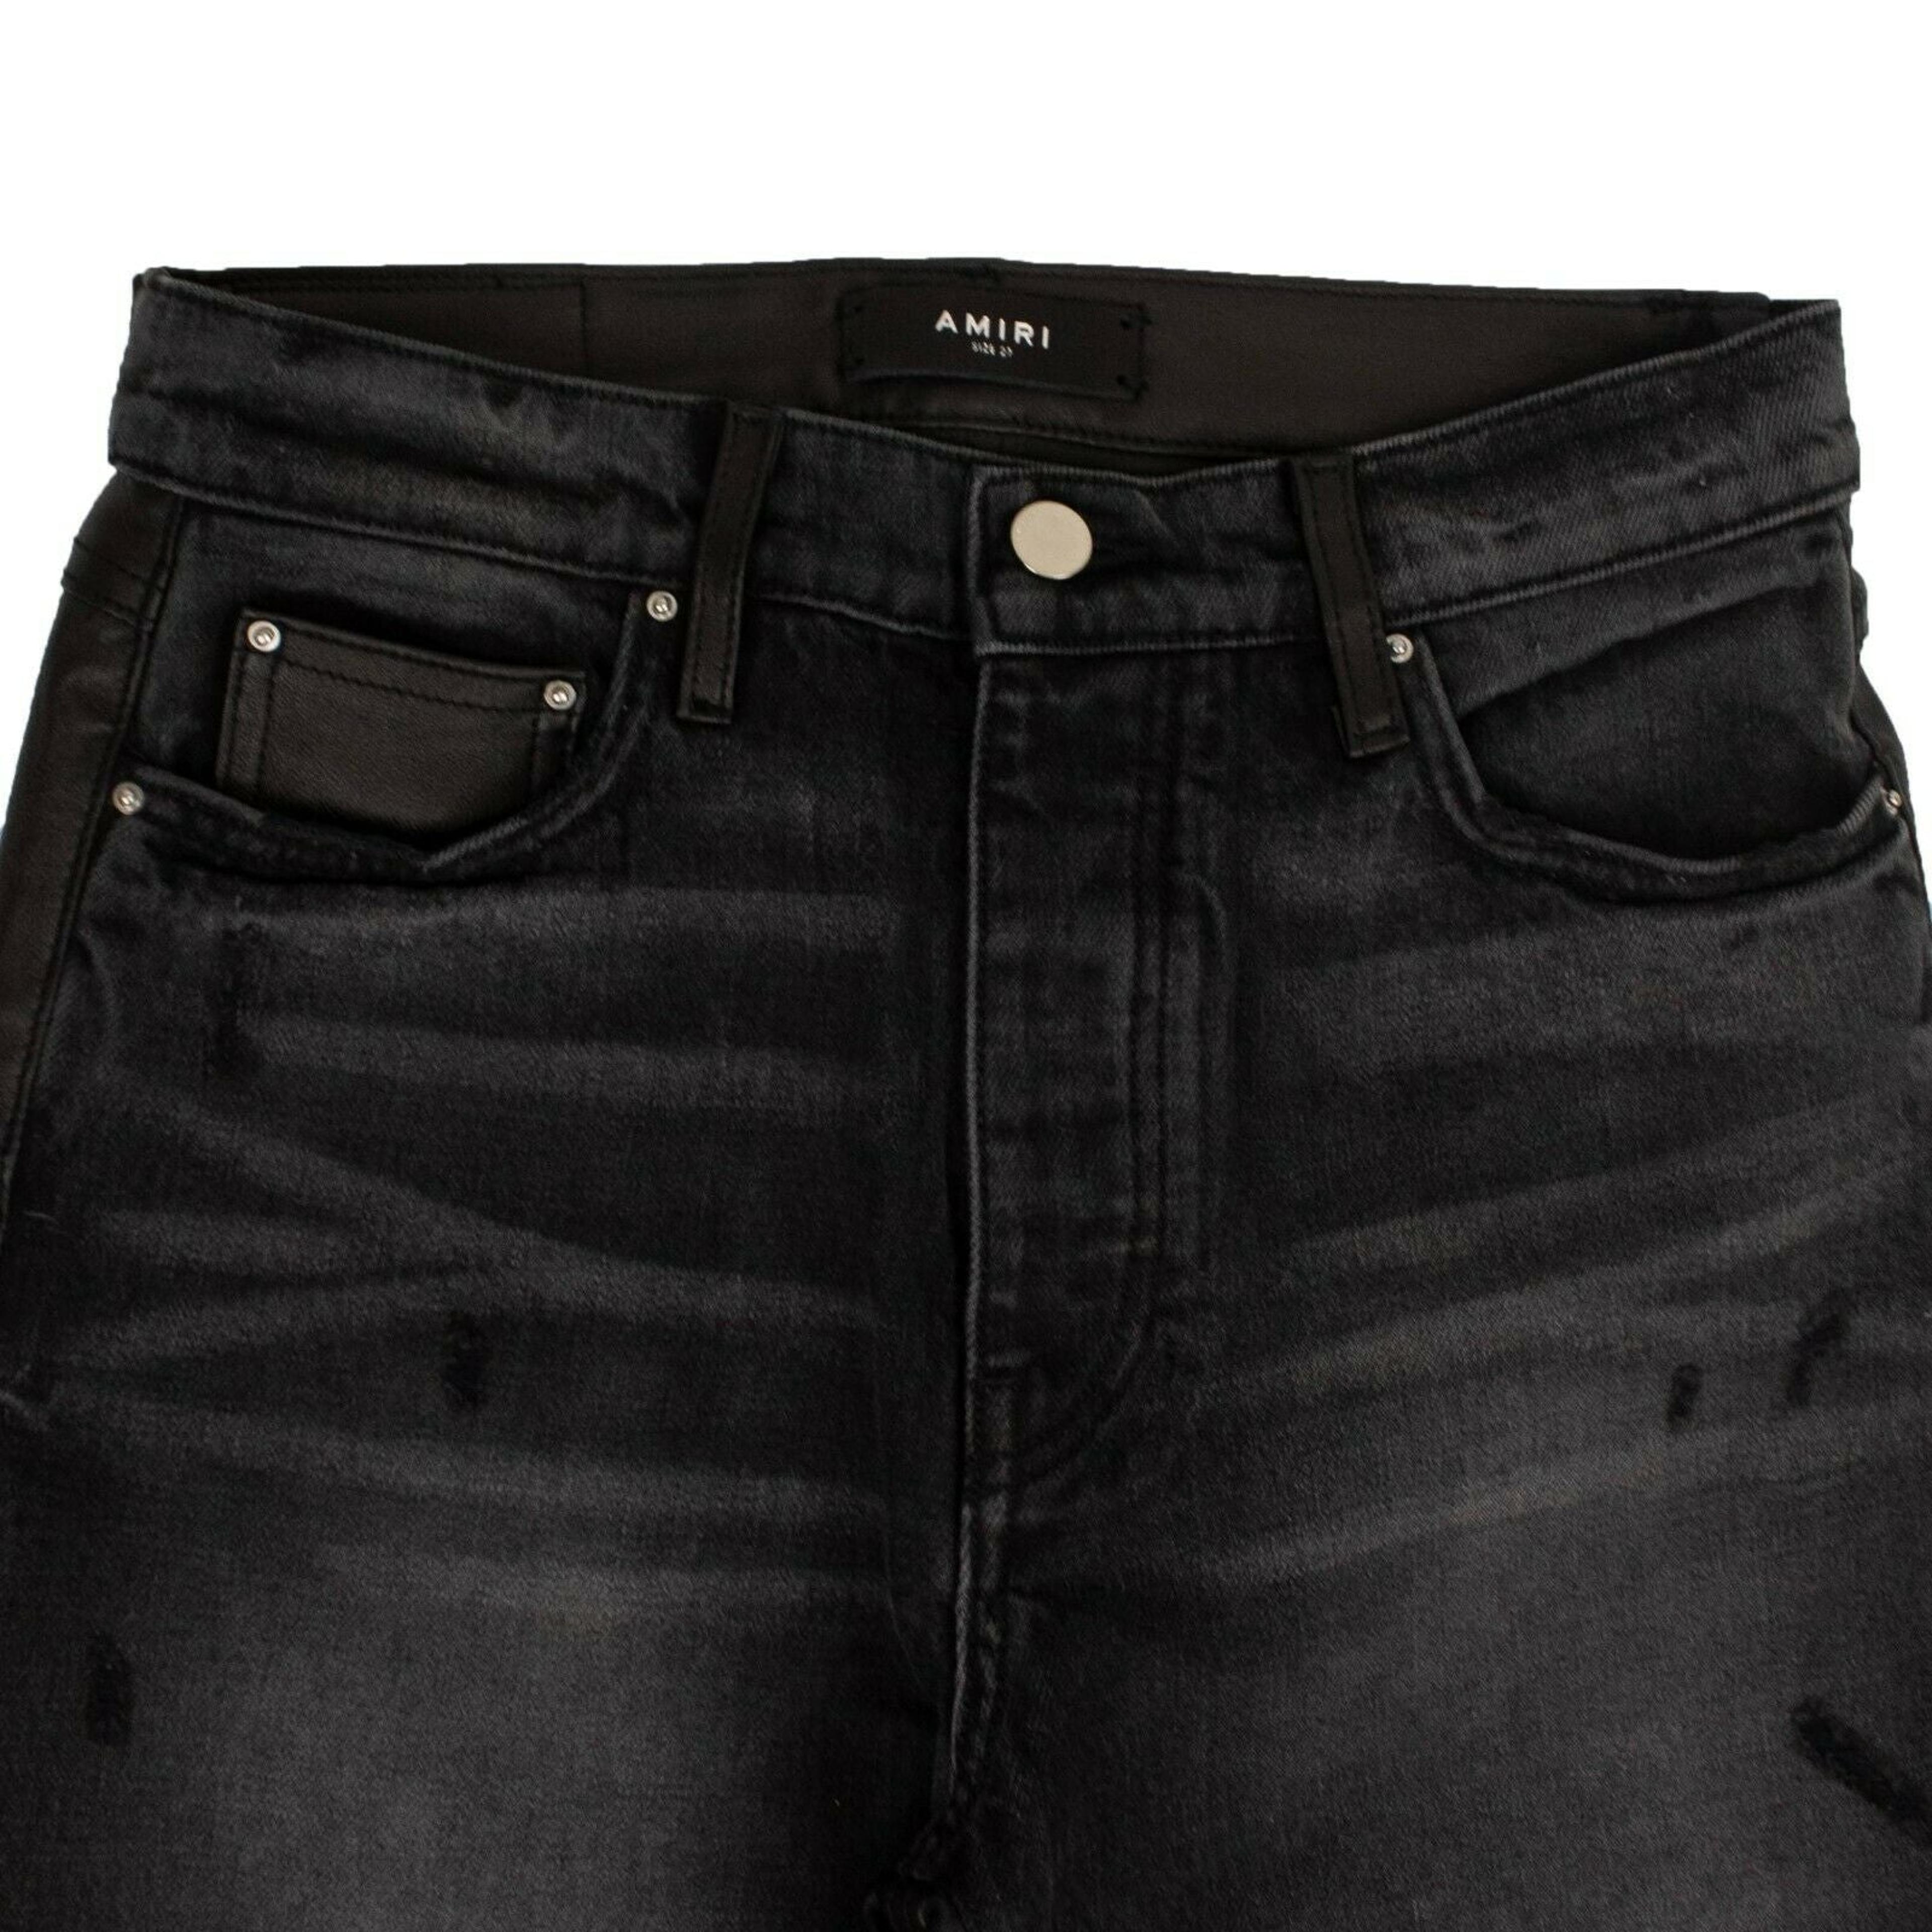 Alternate View 1 of Women's Black Leather Hybrid Cropped Jeans